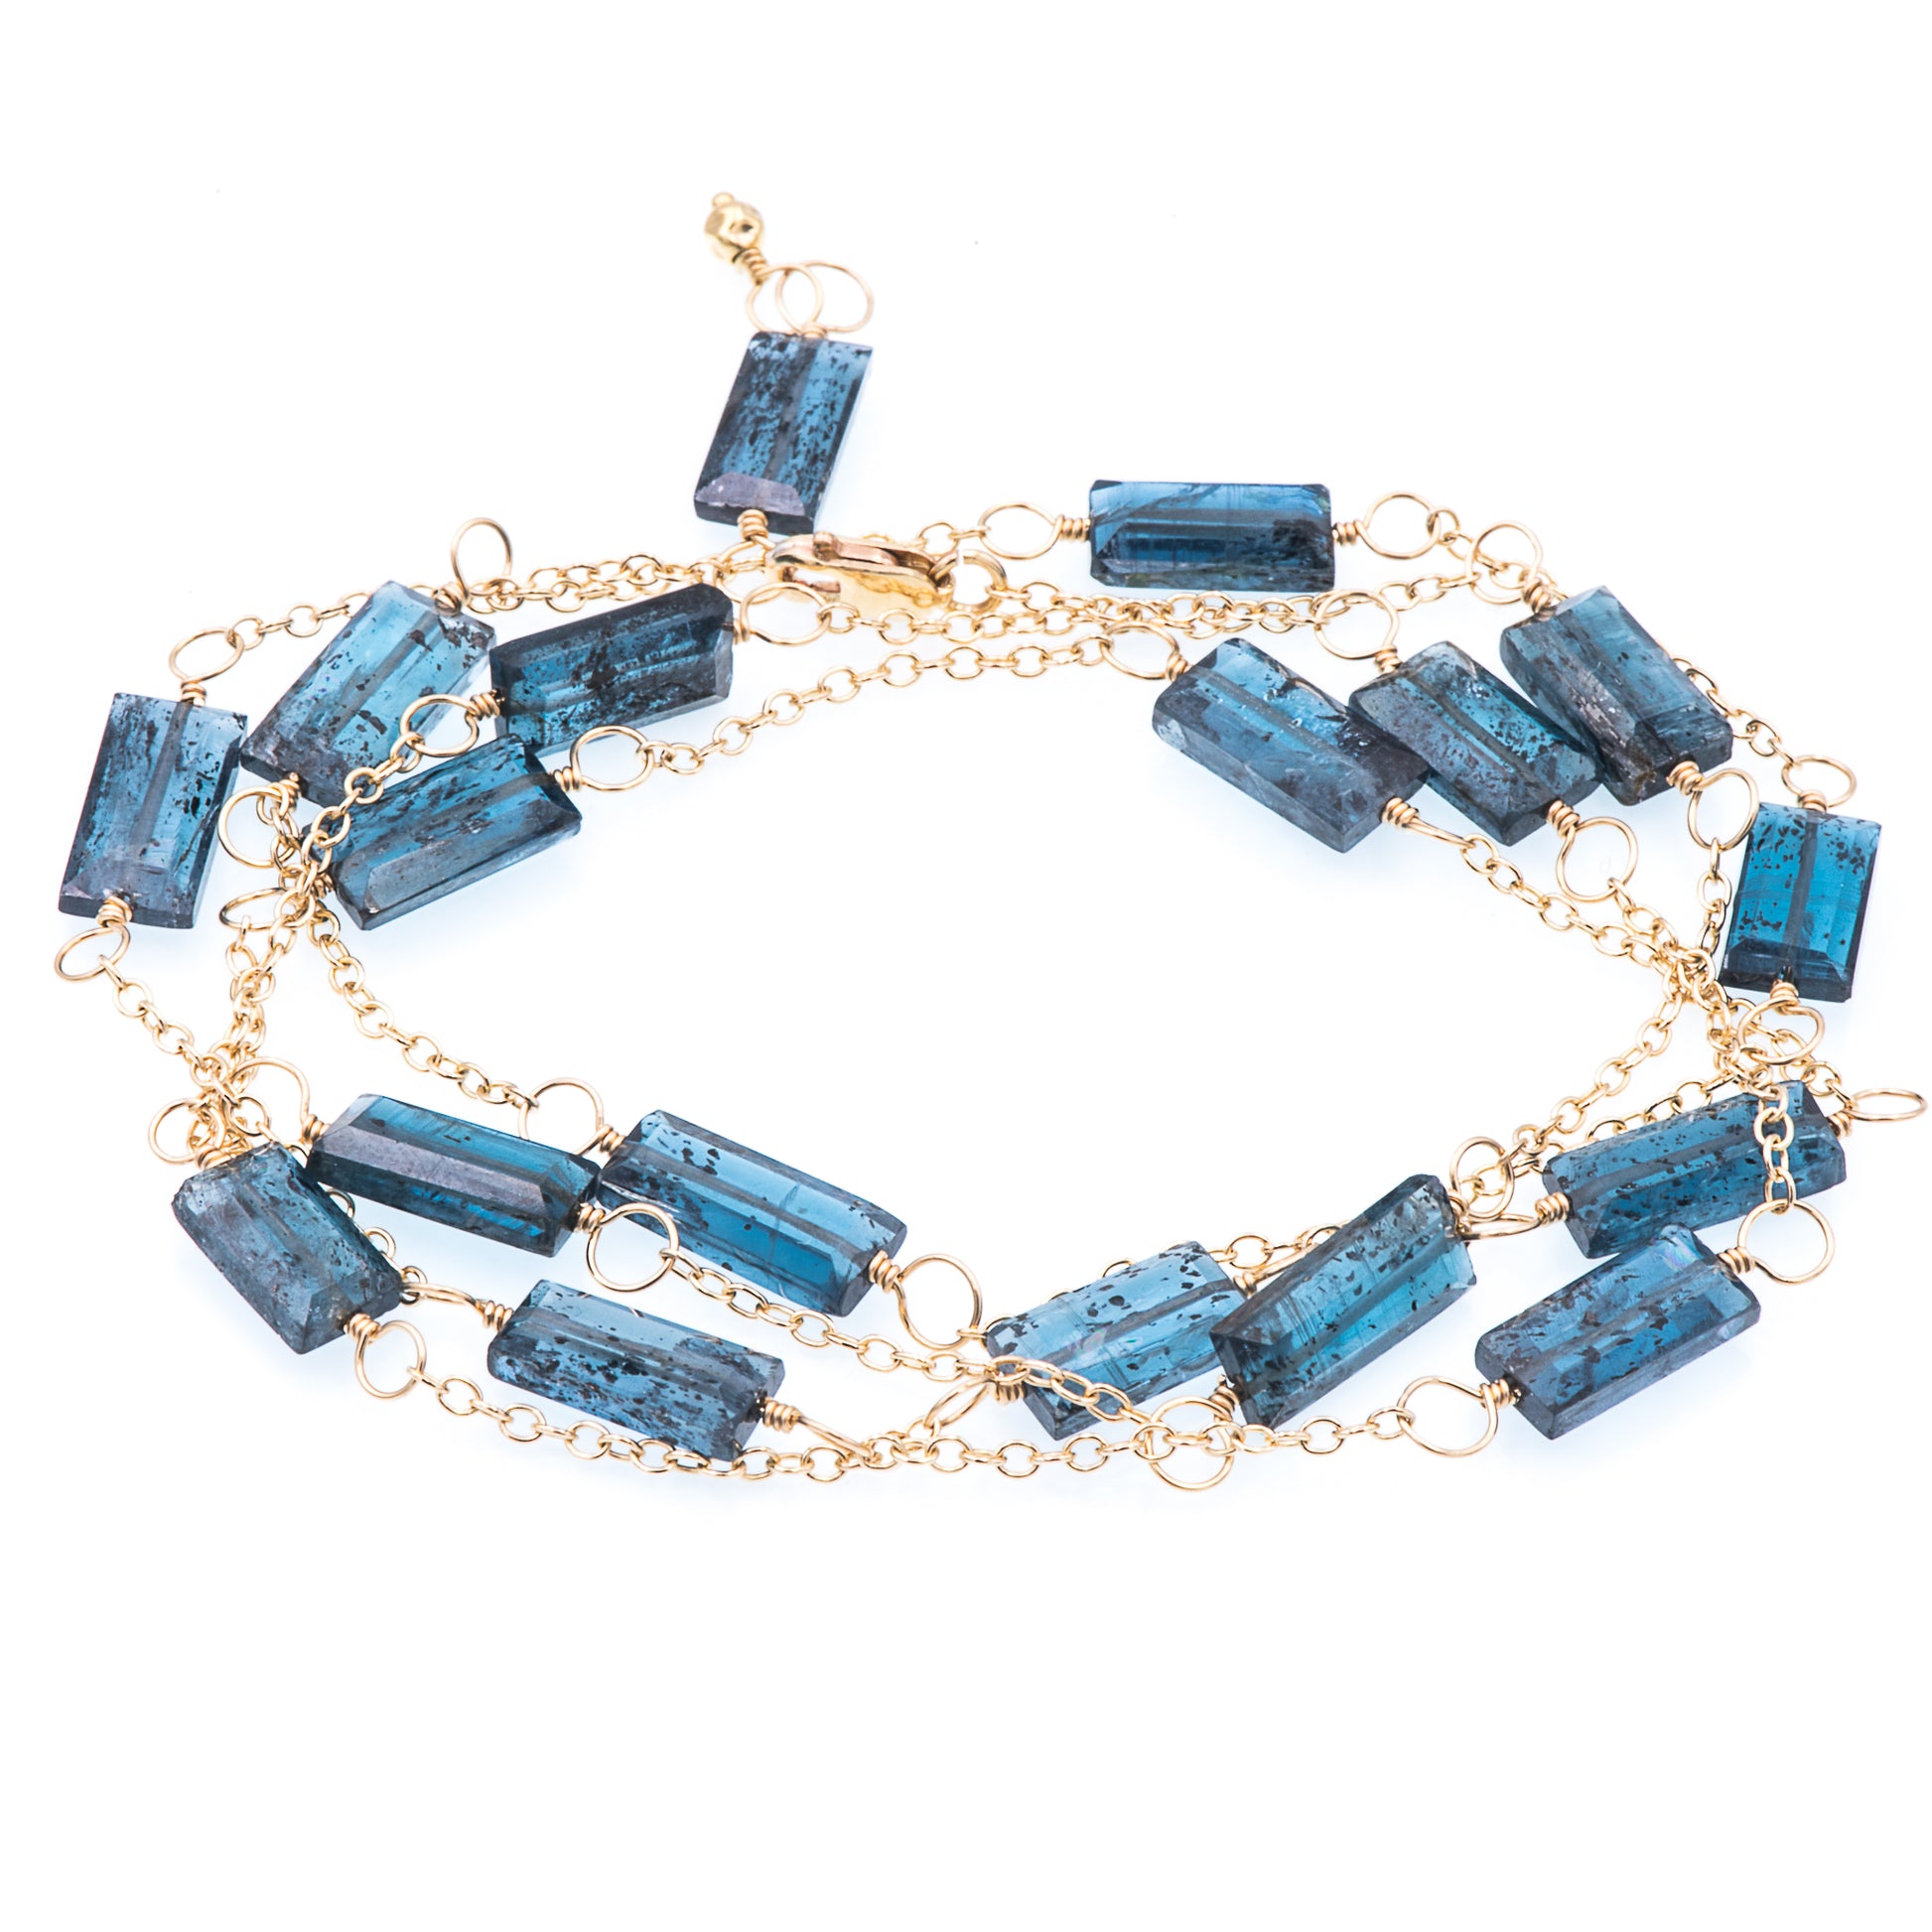 Zurina Ketola long moss aquamarine necklace in 14K gold fill shown as a wrap bracelet on white background.